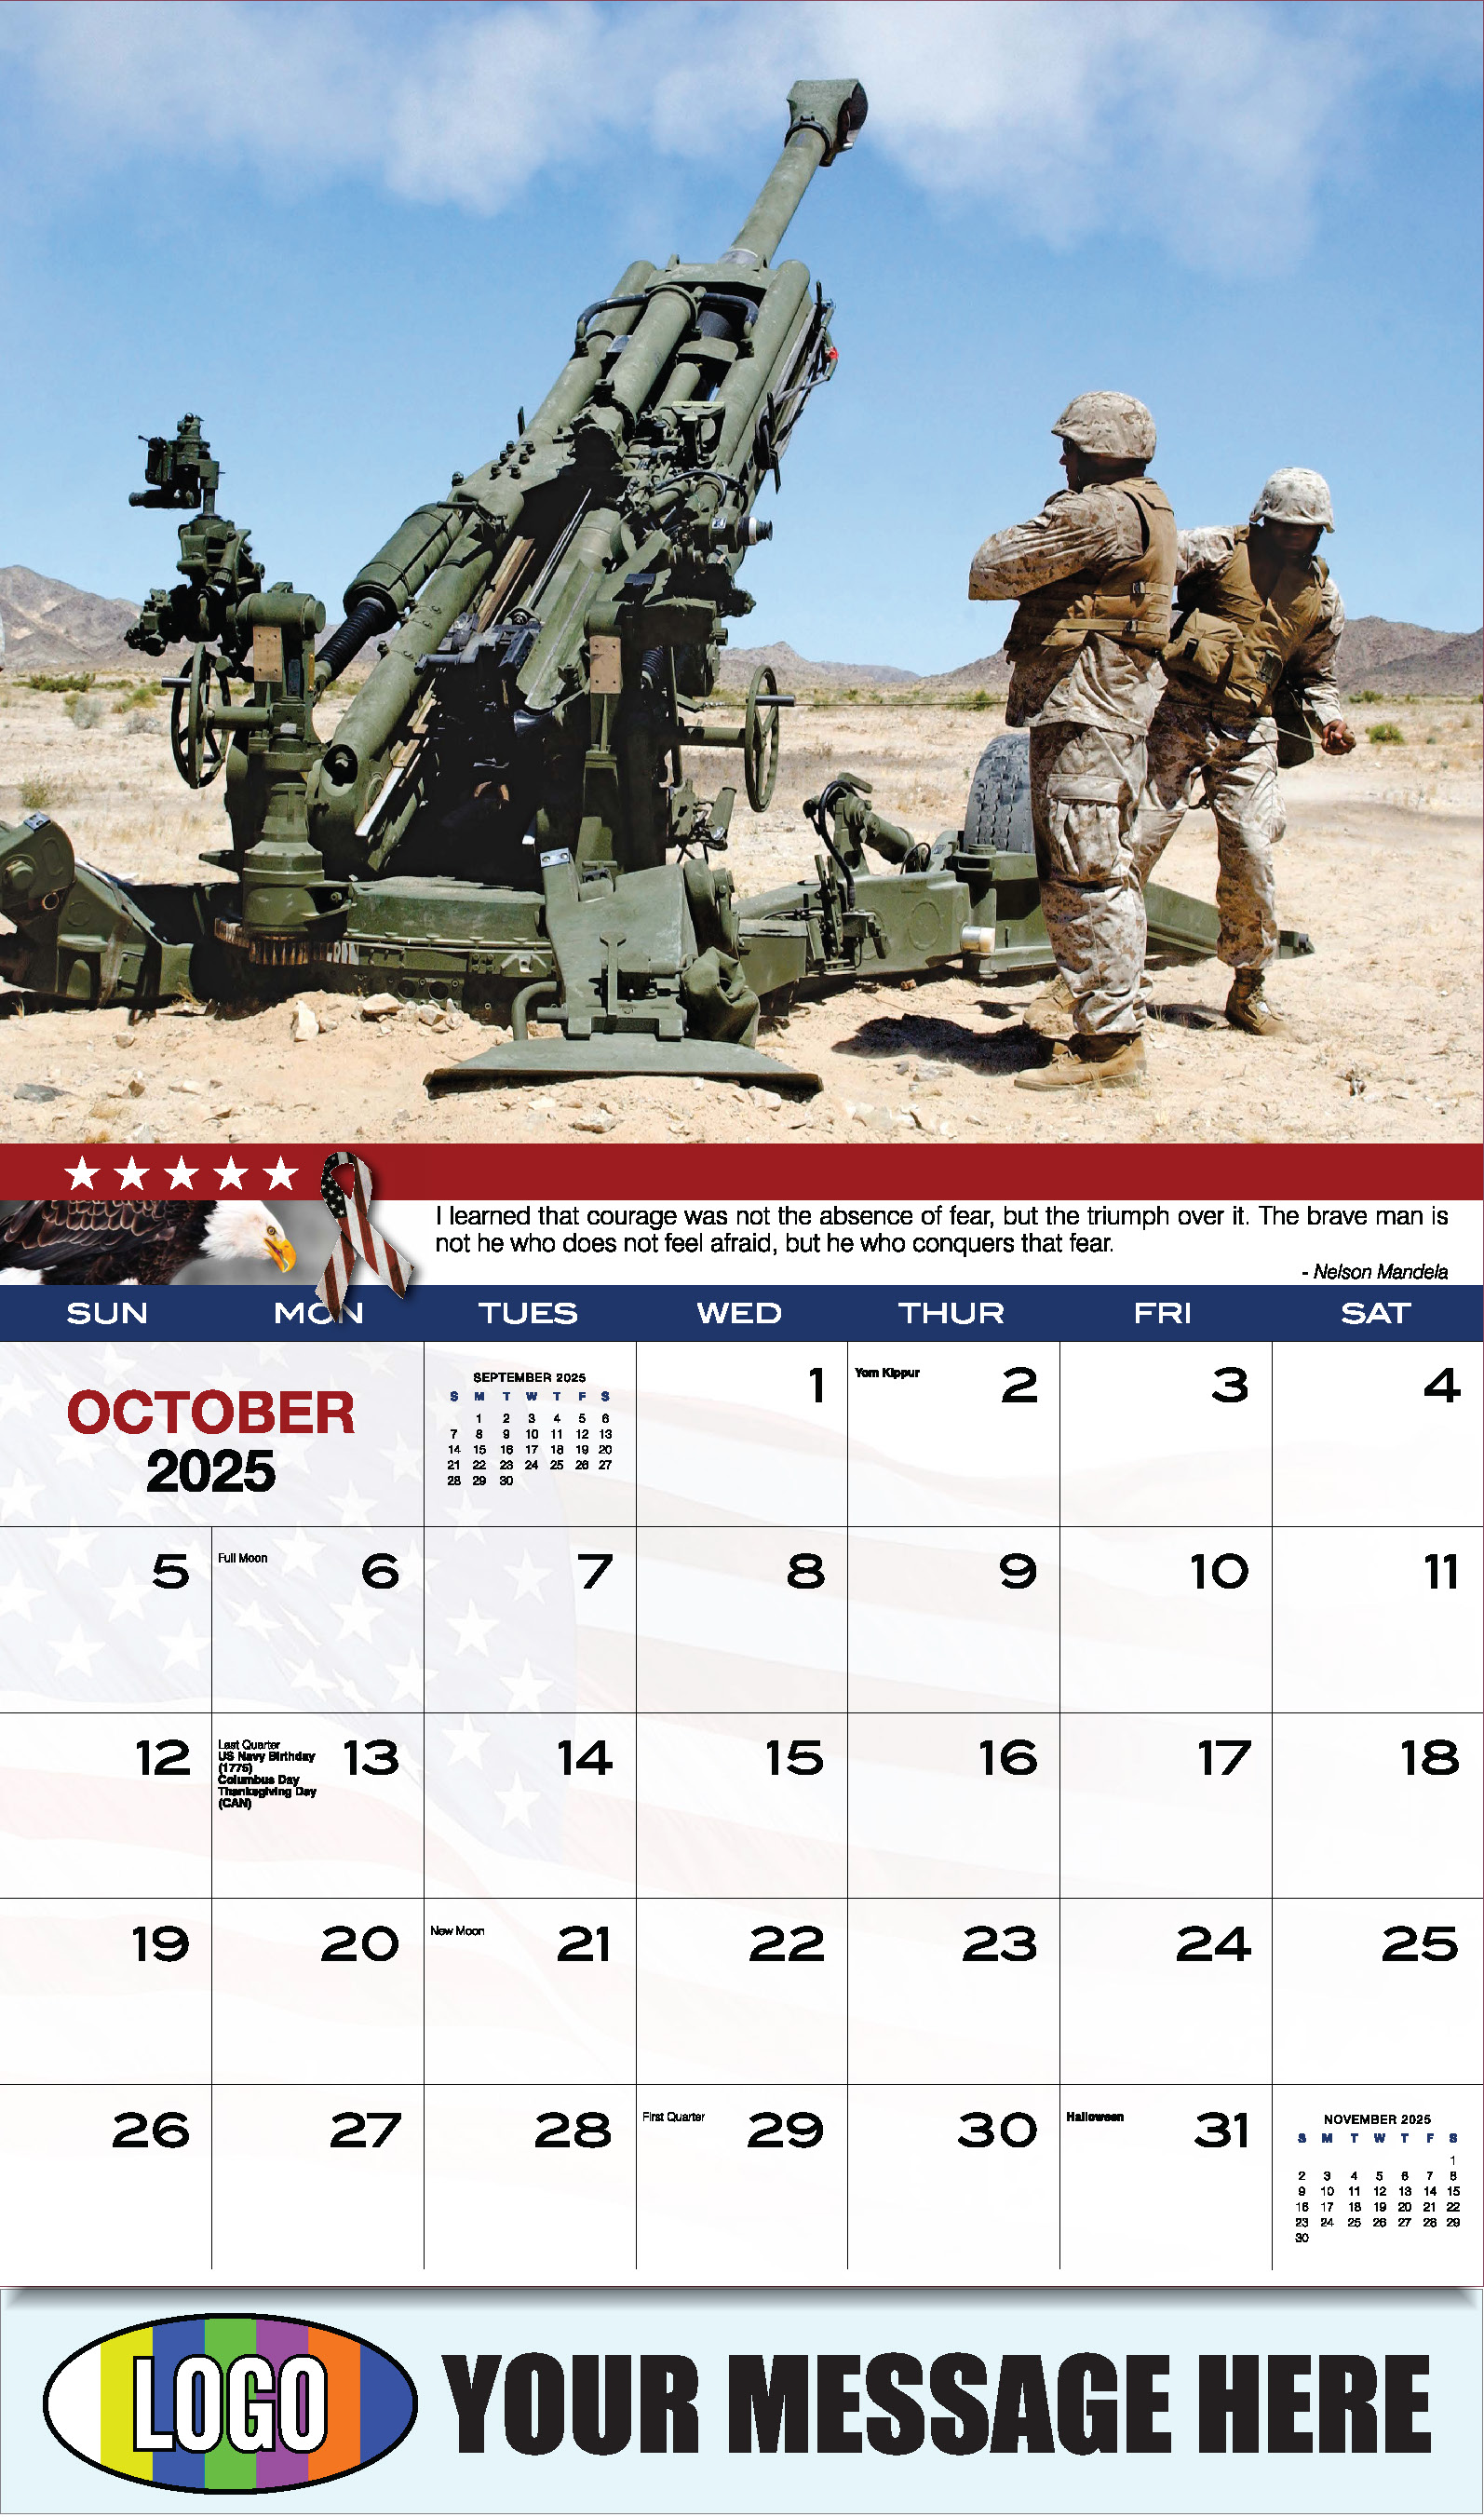 Home of the Brave 2025 USA Armed Forces Business Promo Calendar - October